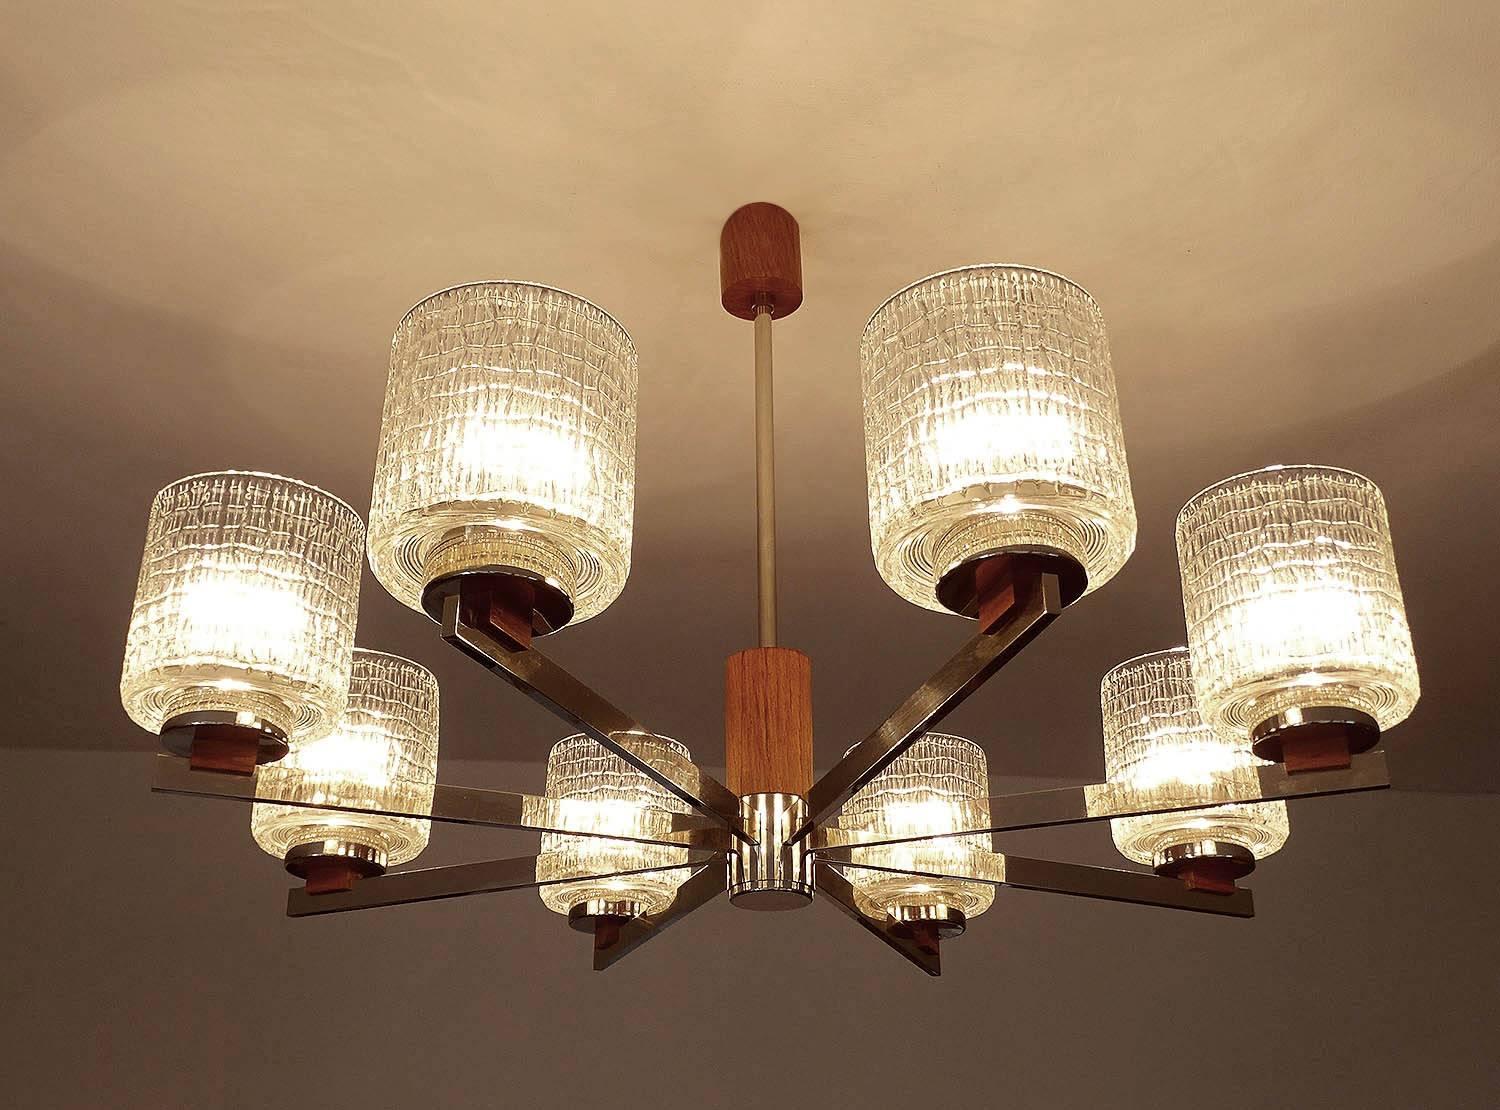 Very large chandelier, 1960s, featuring eight flat rectangular profiled chrome spokes with teak wood trim, heavy structured glass shades, overall high end quality light
18.9 in.H / 48 cmH
Diameter
31.5 in. (80 cm)
Eight standard size bulbs up to 60